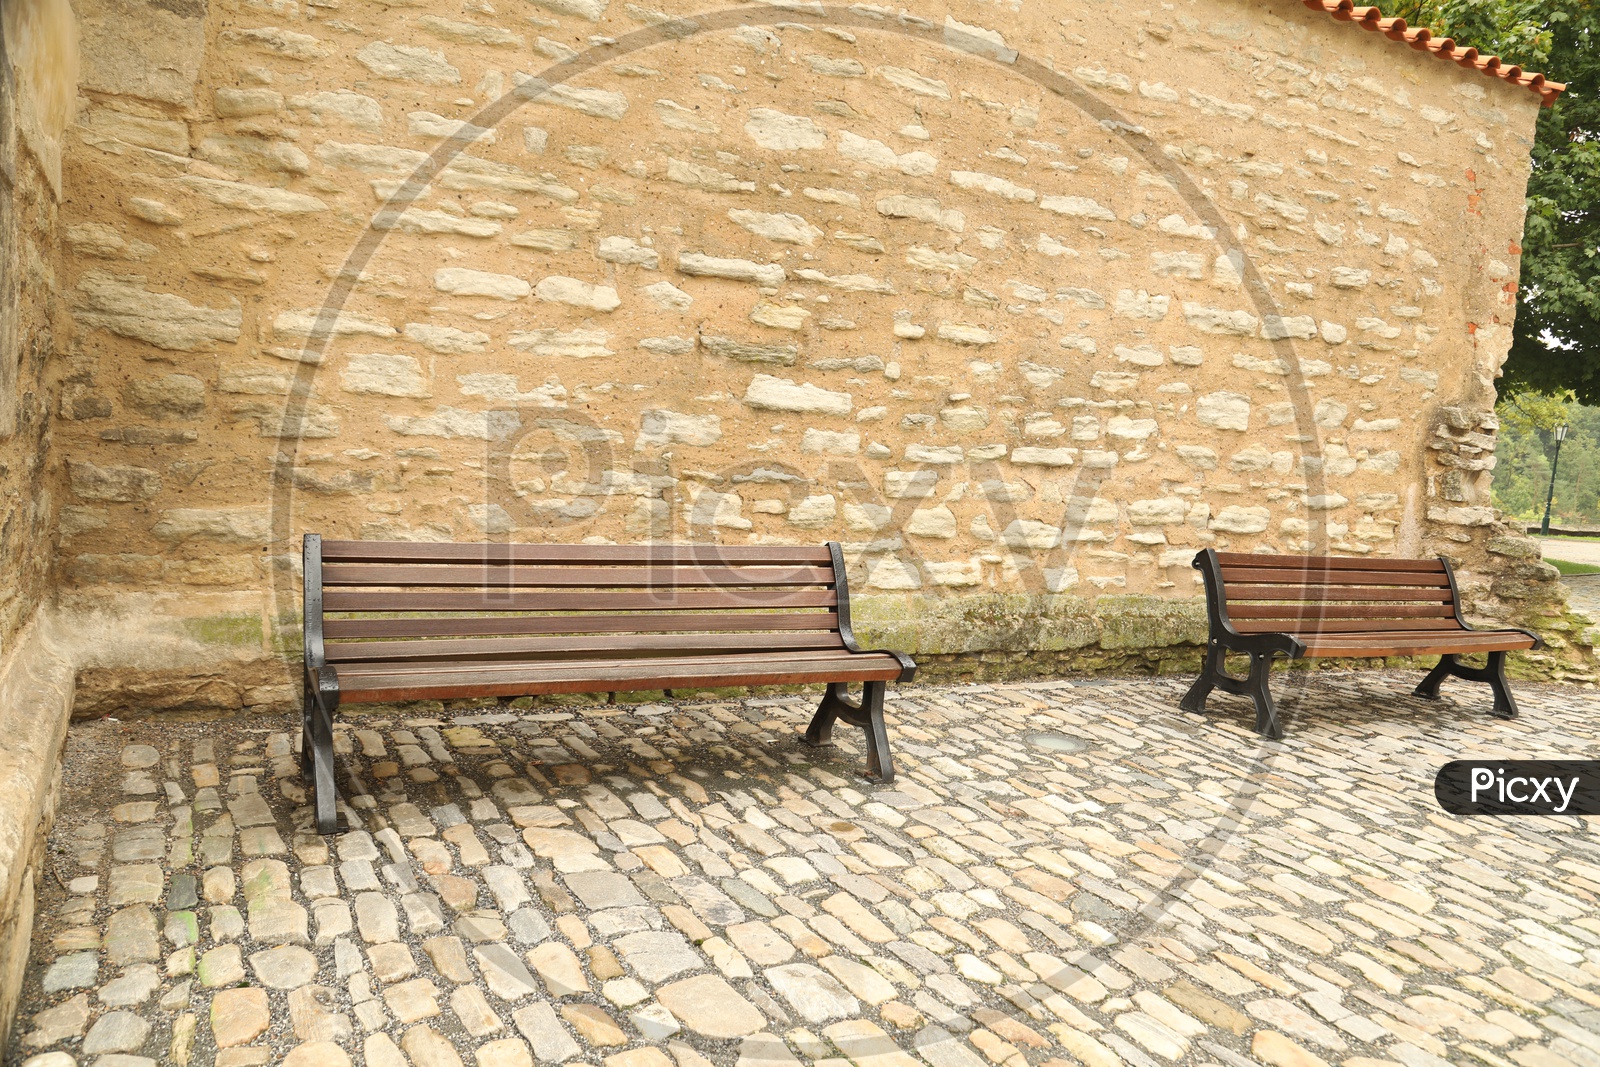 Benches alongside the old stoned wall